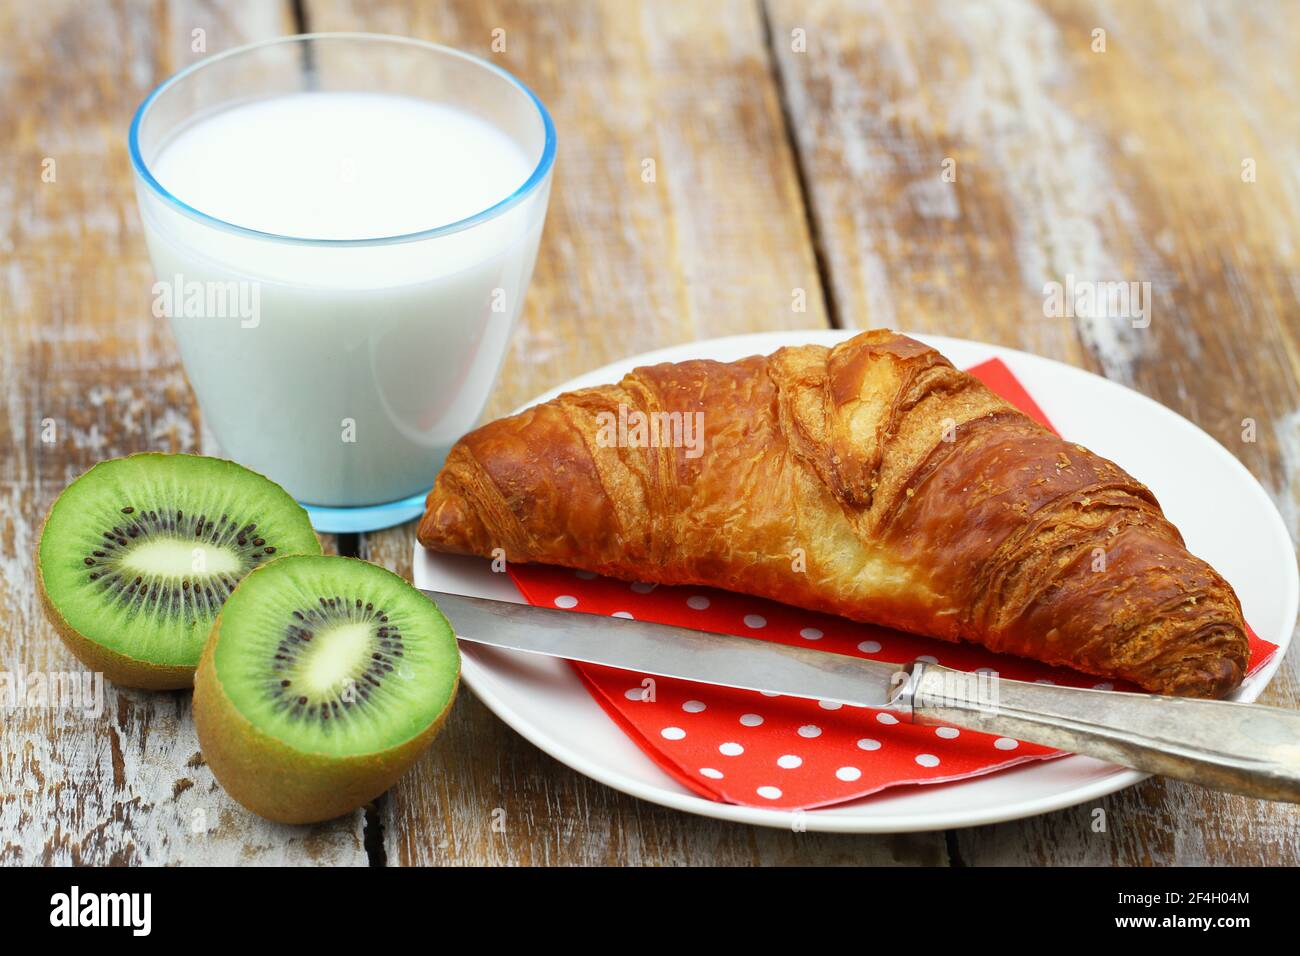 Simple continental breakfast: French croissant, kiwi fruit and glass of milk Stock Photo